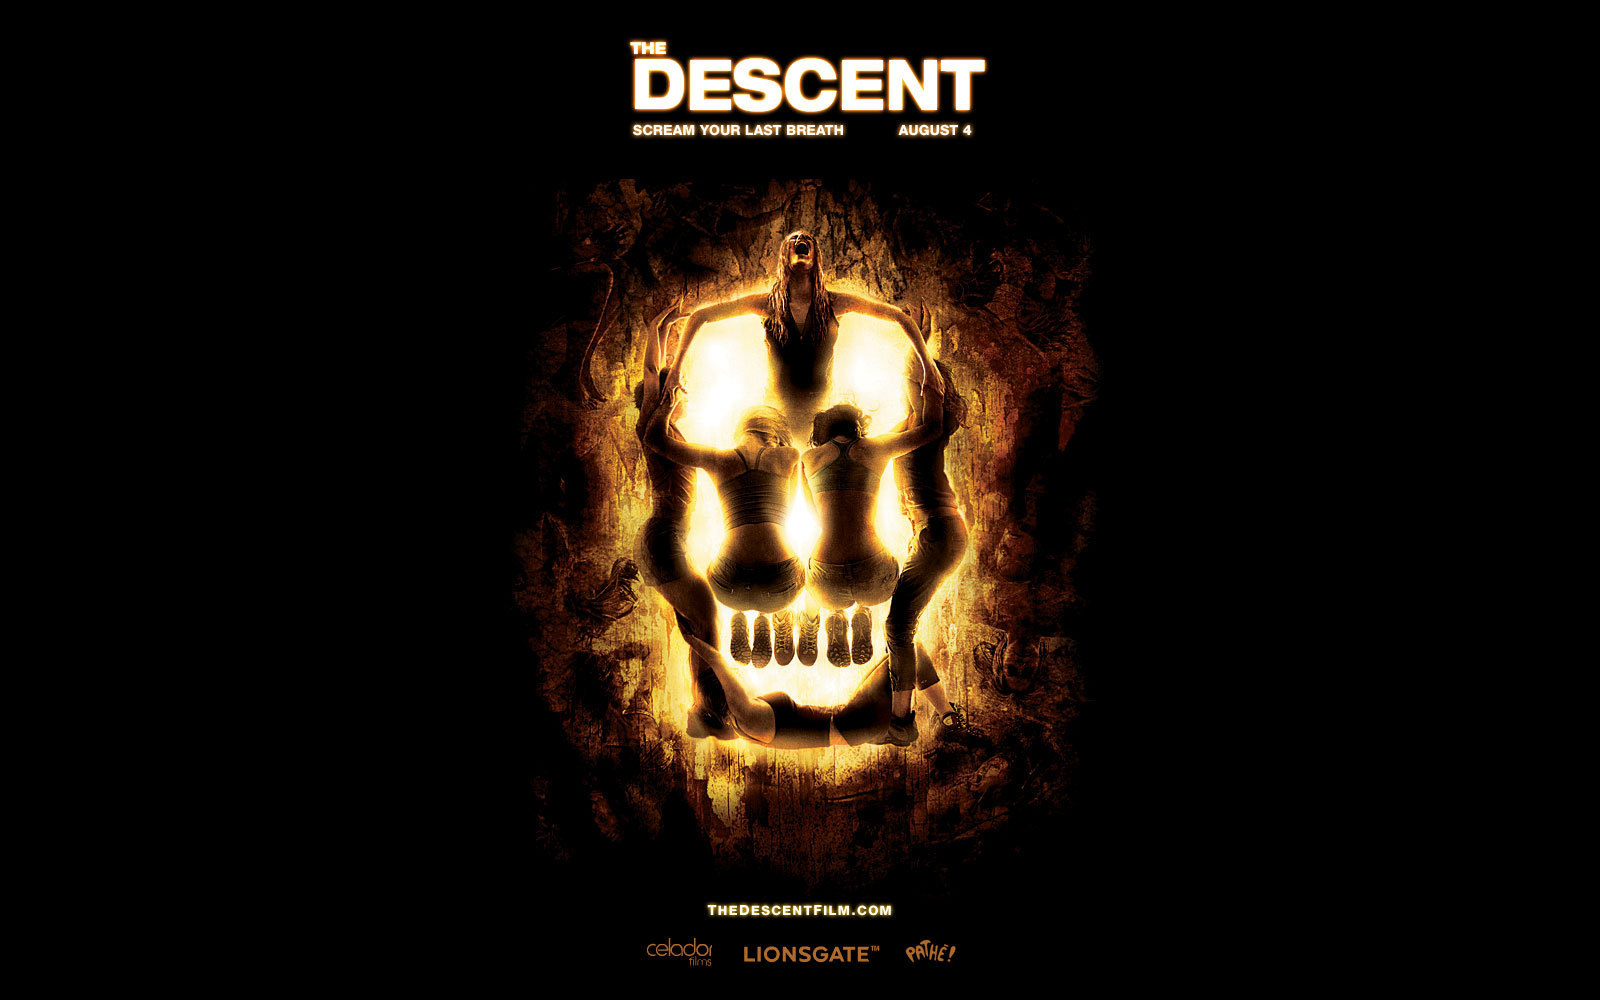 Image Horror Movies The Descent Wallpaper Pc Android iPhone